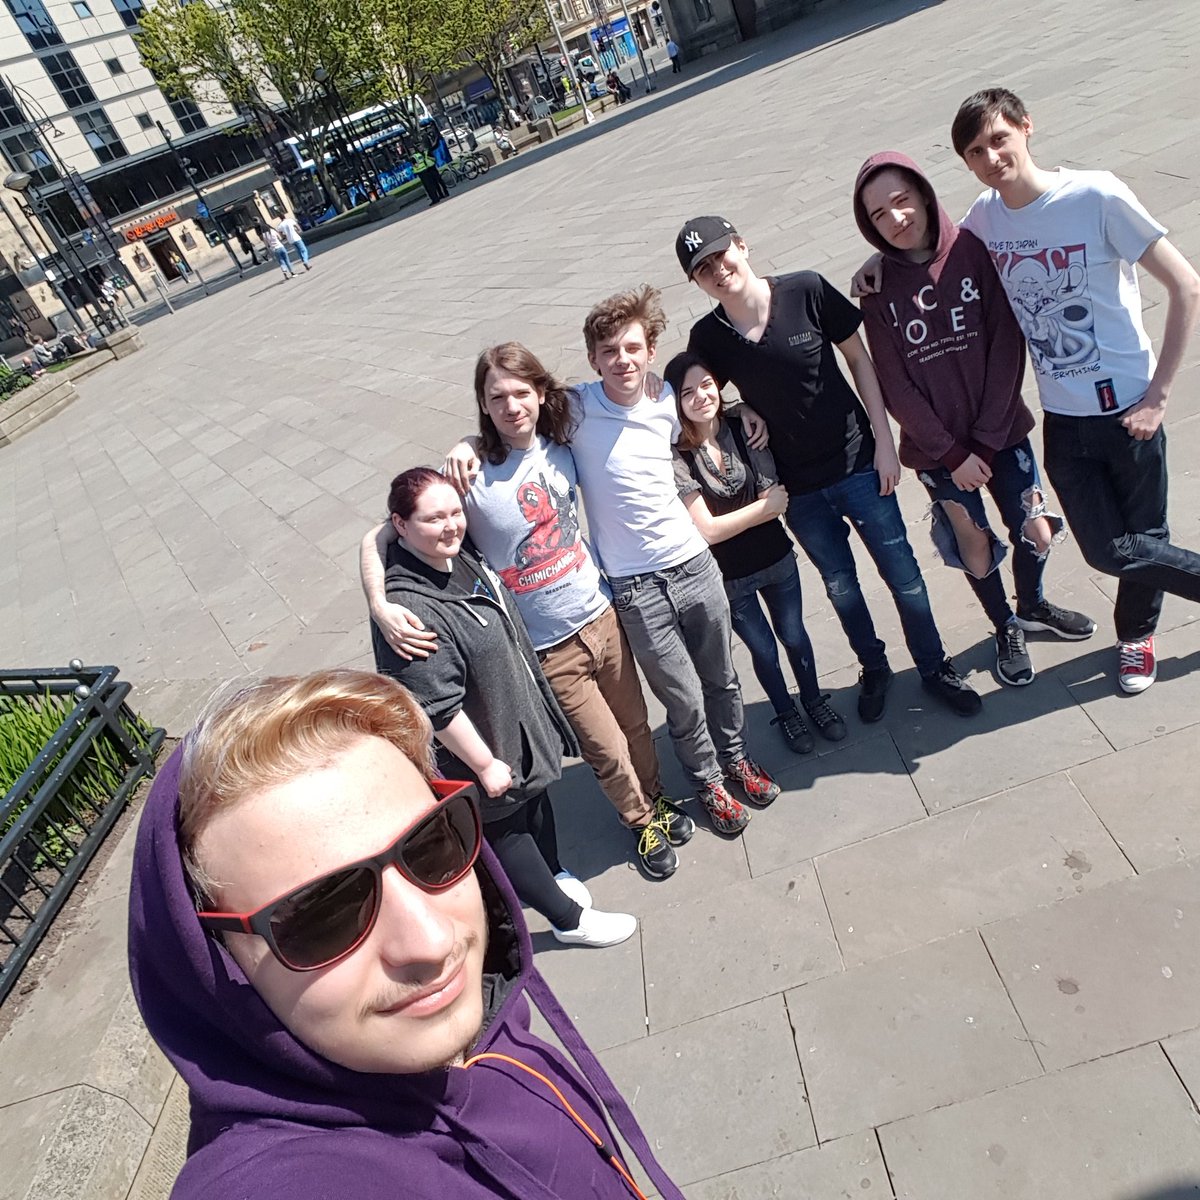 Had an awesome meet up in Bradford with these nerds (also Vrcbunny, can't find him on Twitter)